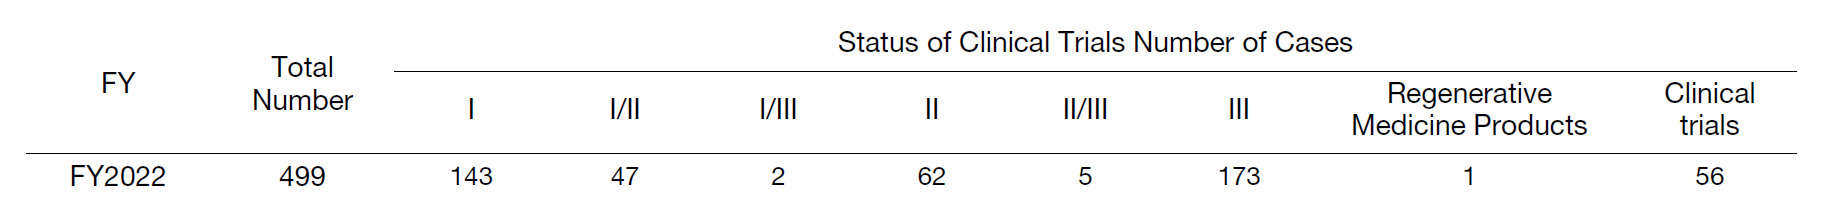 Table 1. Status of Clinical Trials